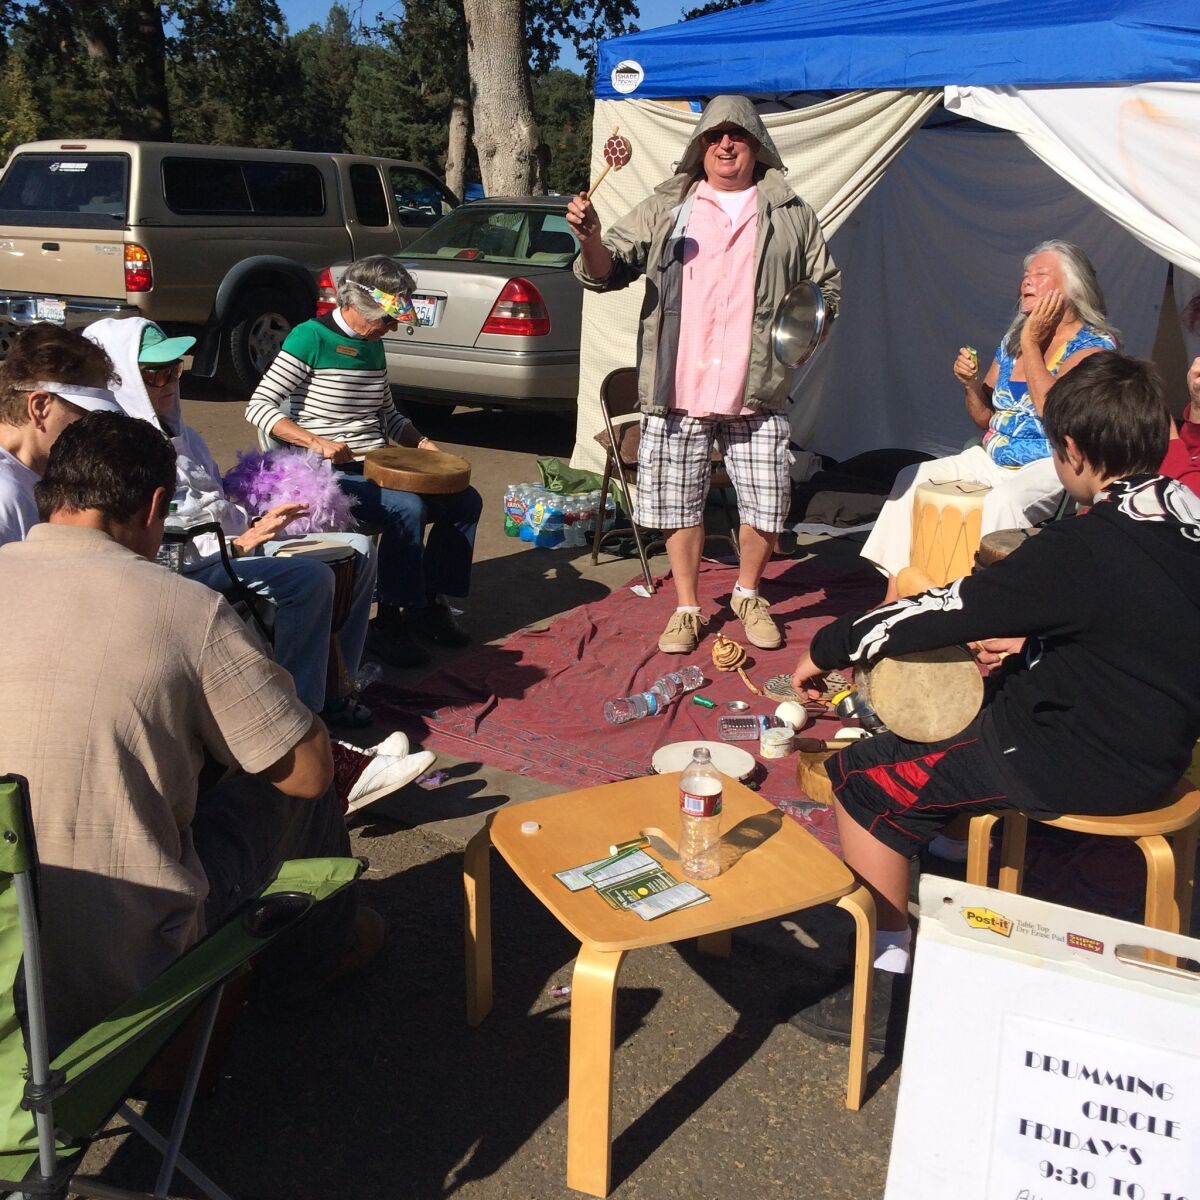 Evacuees from the Valley fire participate in a drum circle at a Red Cross disaster center set up at the Calistoga Fairgrounds.